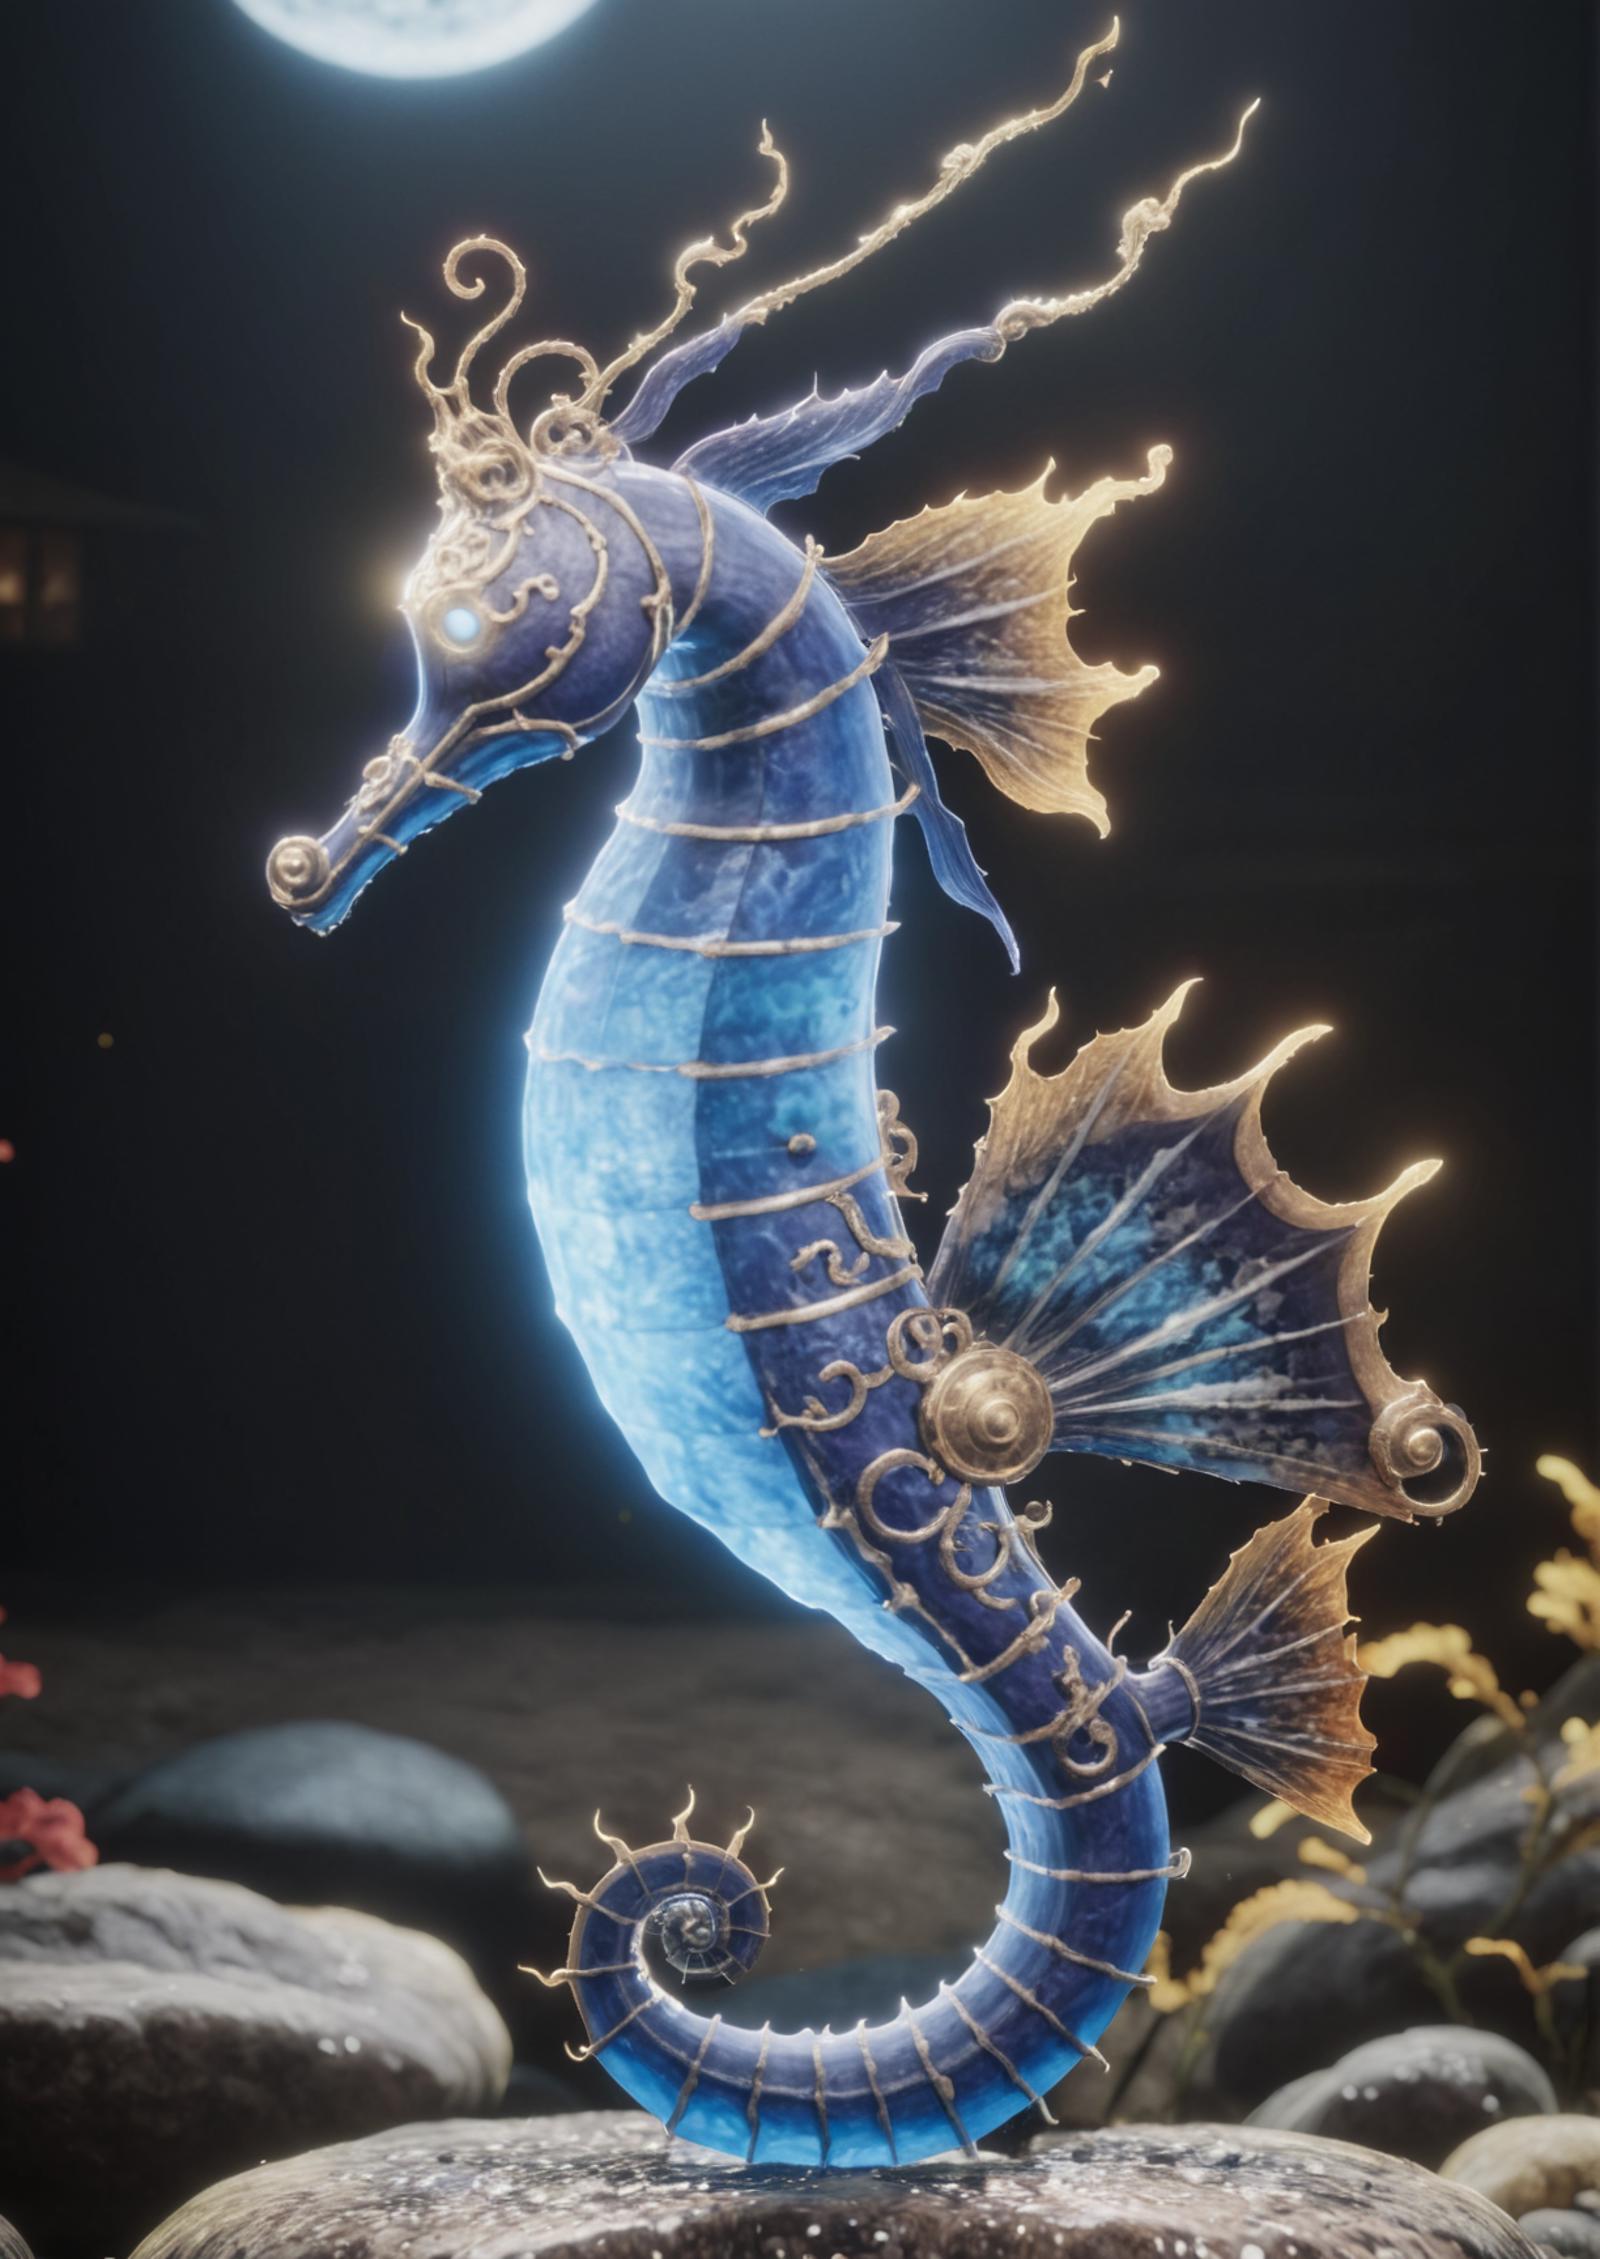 Glowing Blue Fish Sculpture with Gold Decorations on Tail